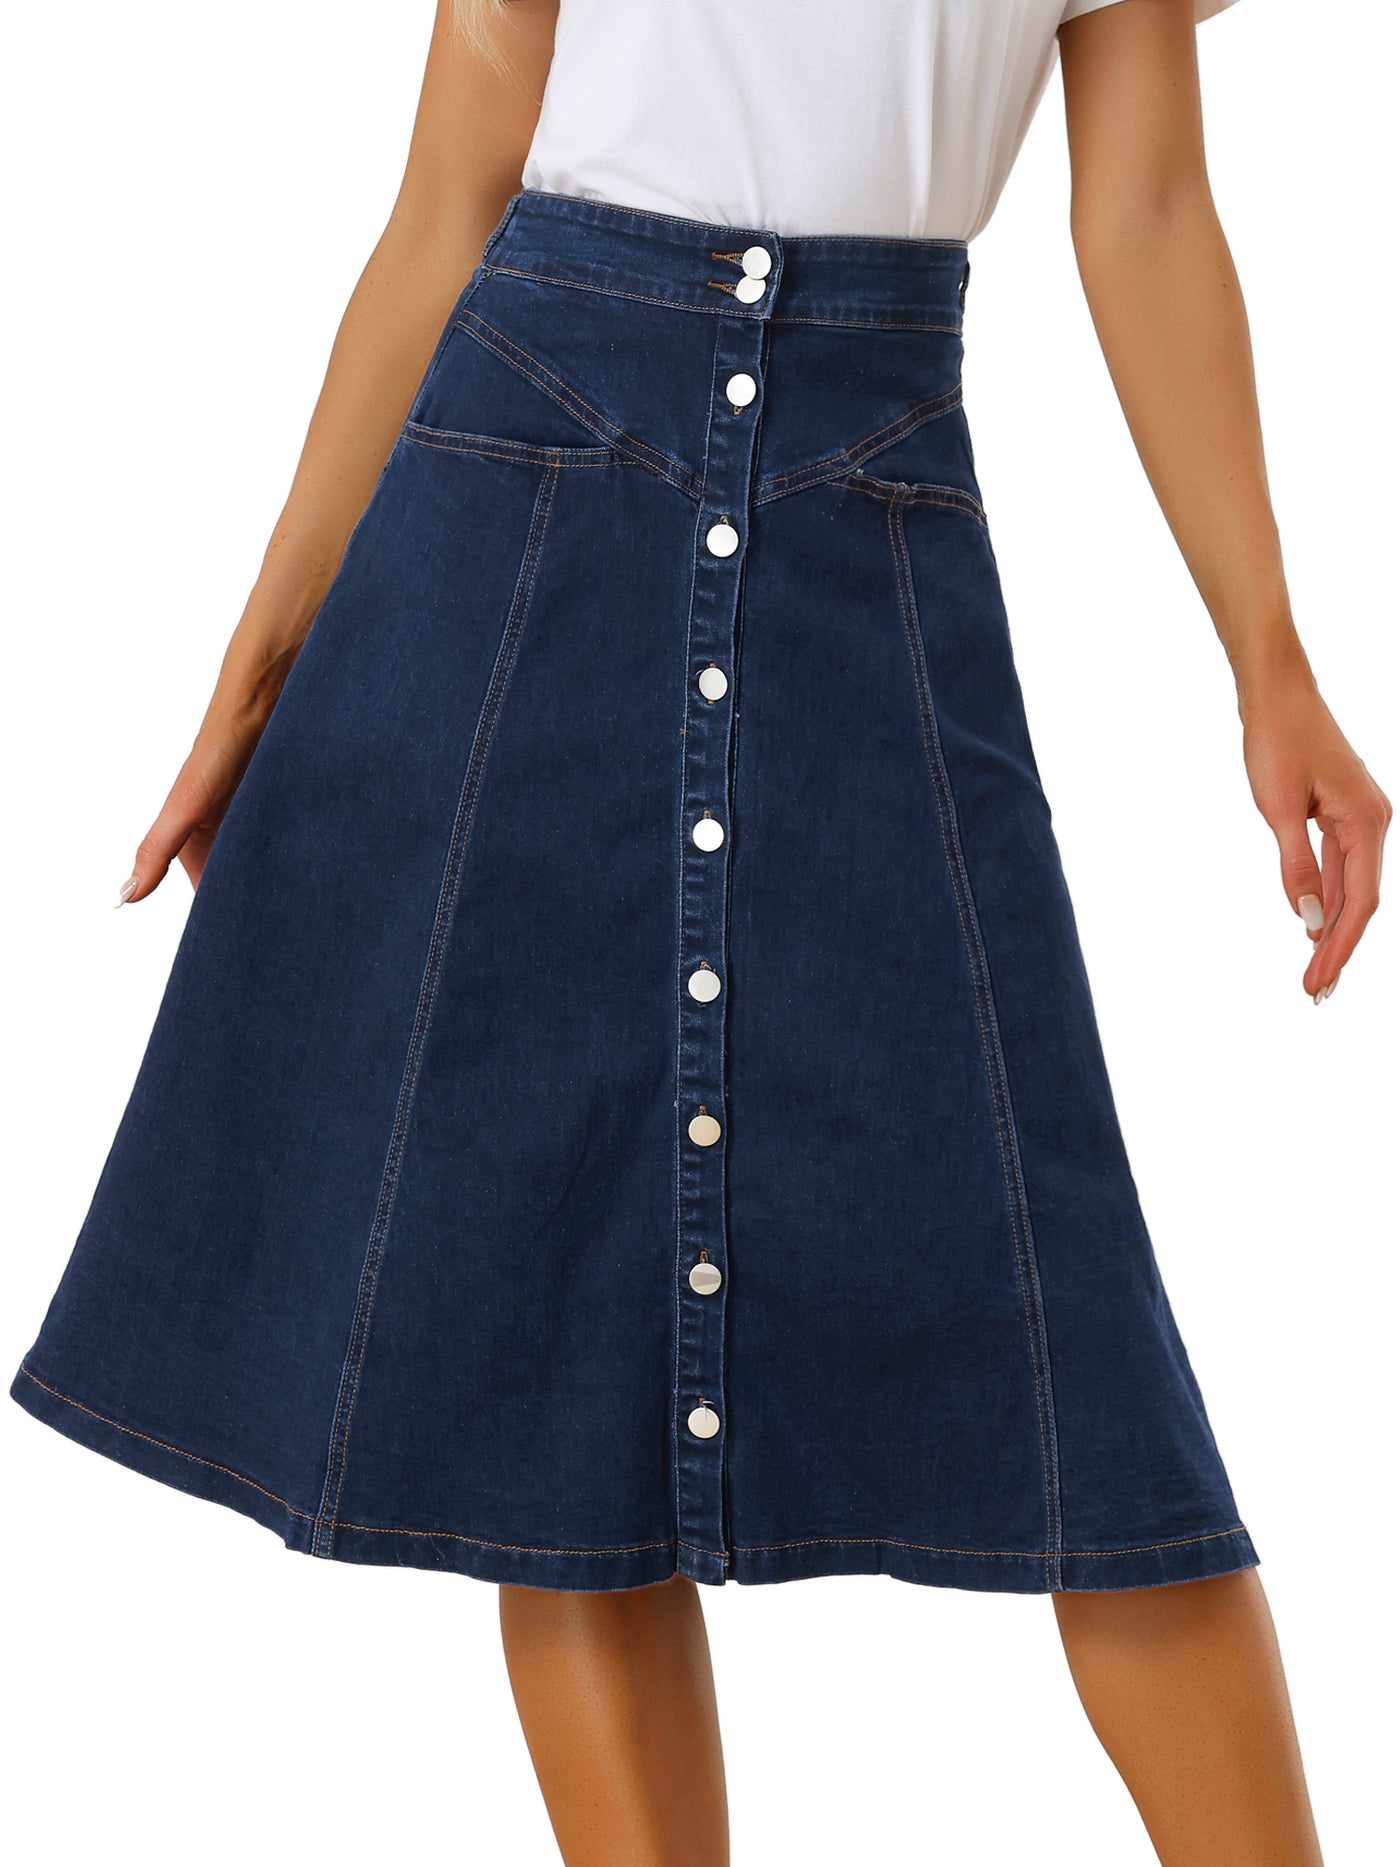 Allegra K Womens' Stretchy High Waist Buttons Front A-Line Flowy Midi Skirts with Pockets